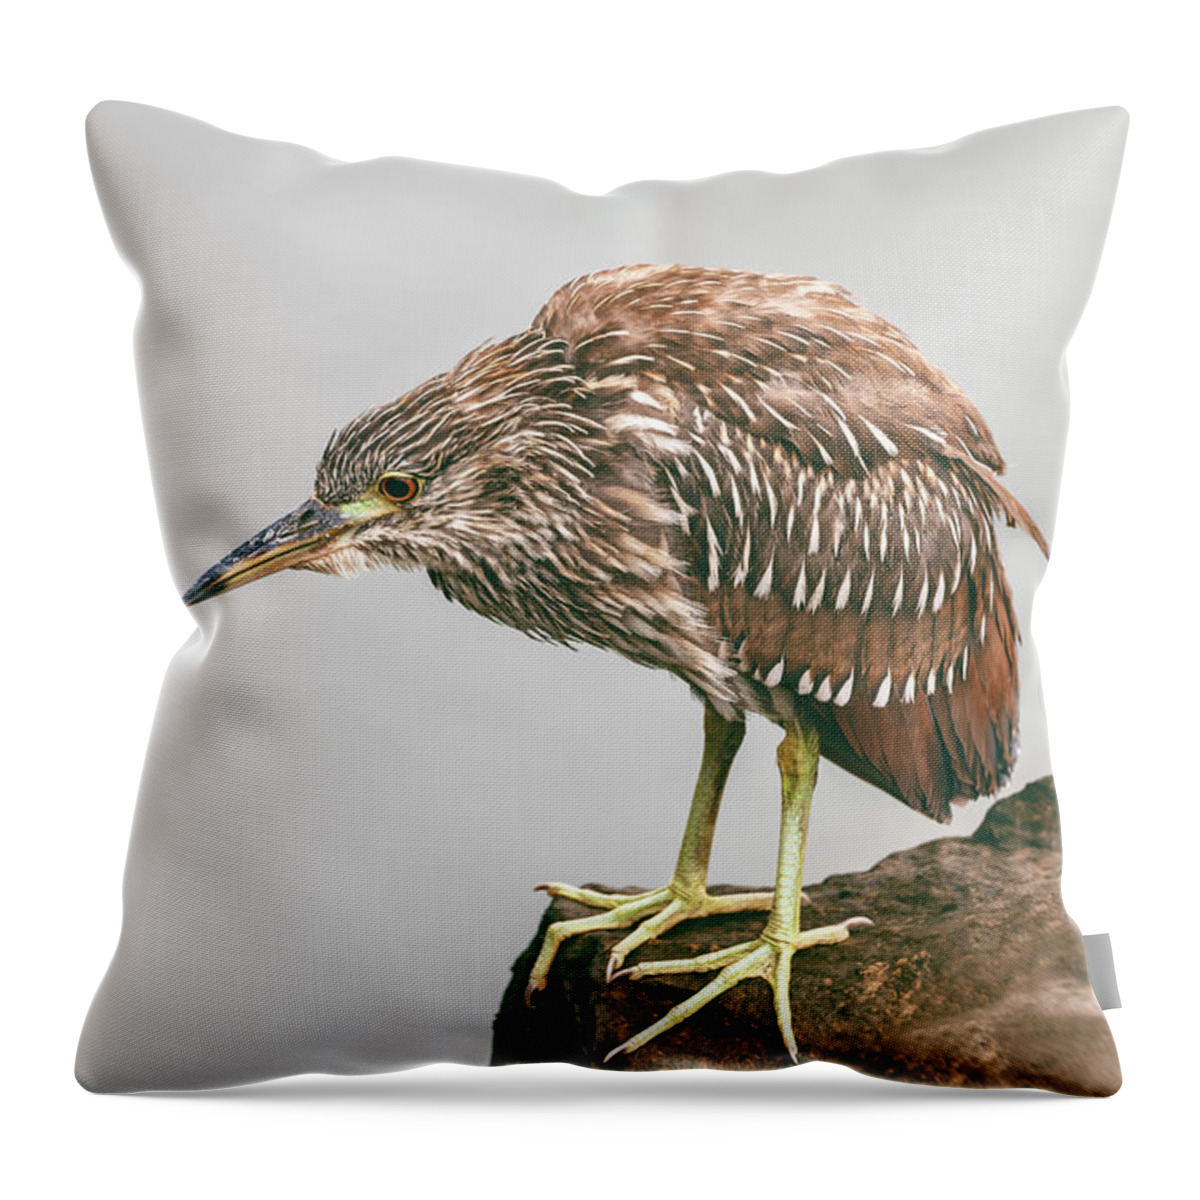 Black-capped Night Heron Throw Pillow featuring the photograph Young Heron by Jonathan Nguyen